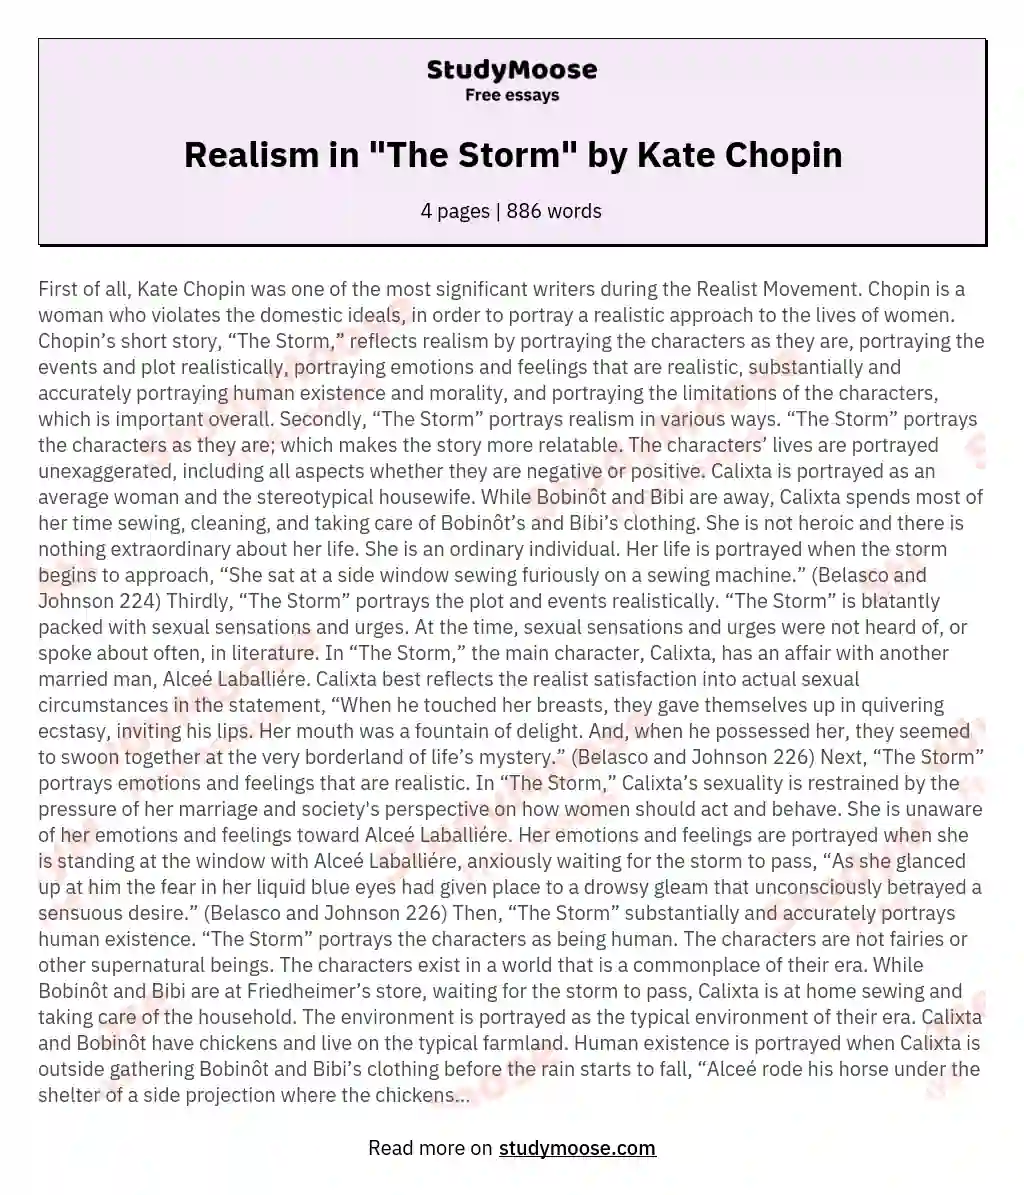 Realism in "The Storm" by Kate Chopin essay